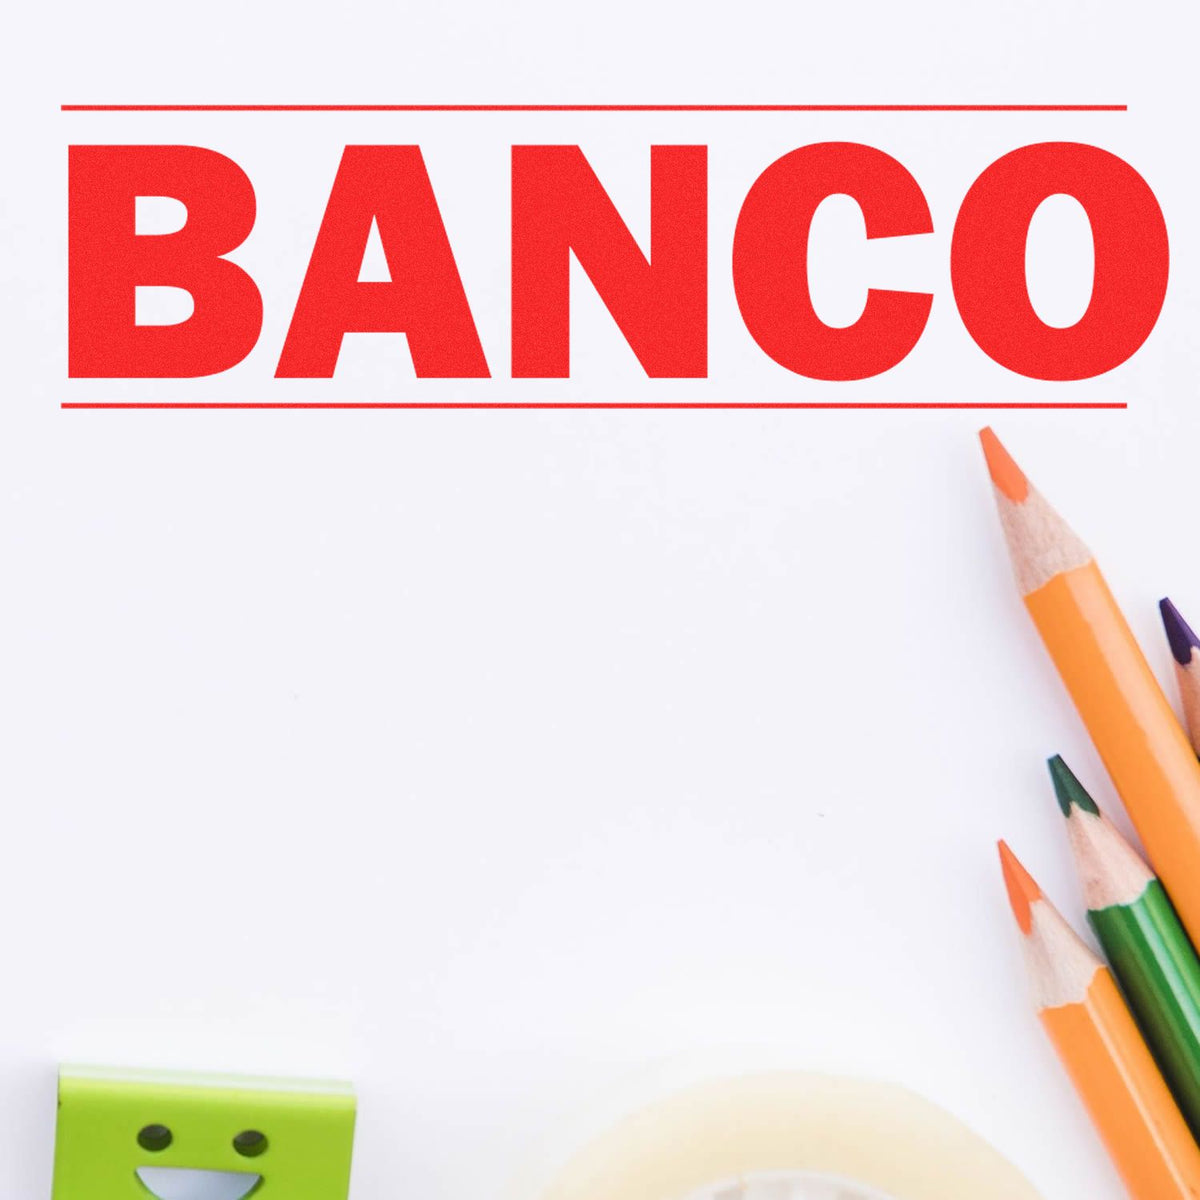 Bold Banco Rubber Stamp In Use Photo